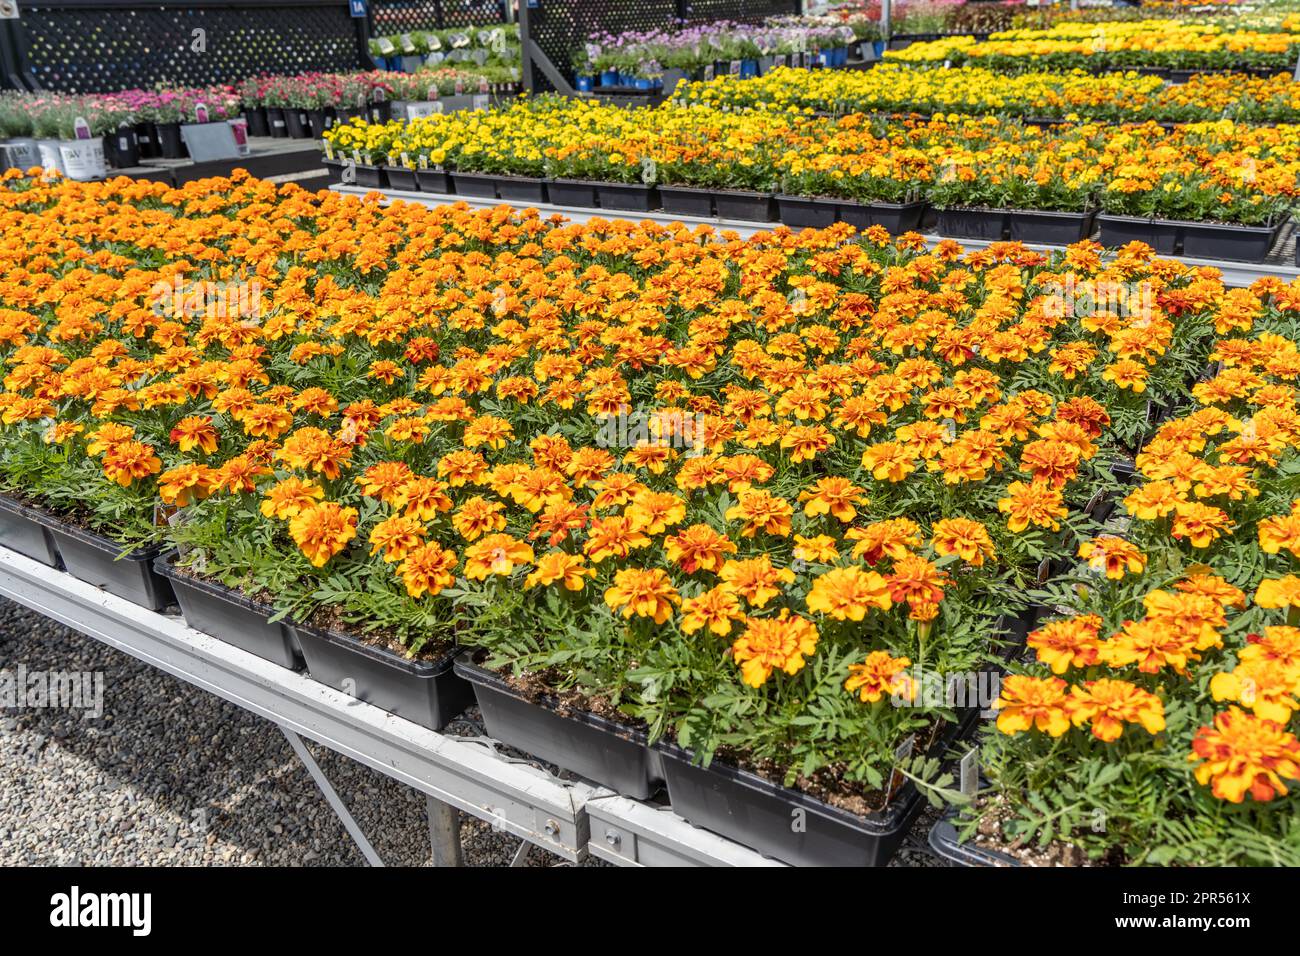 Colorful marigolds on sale at greenhouse ready for spring planting. Stock Photo